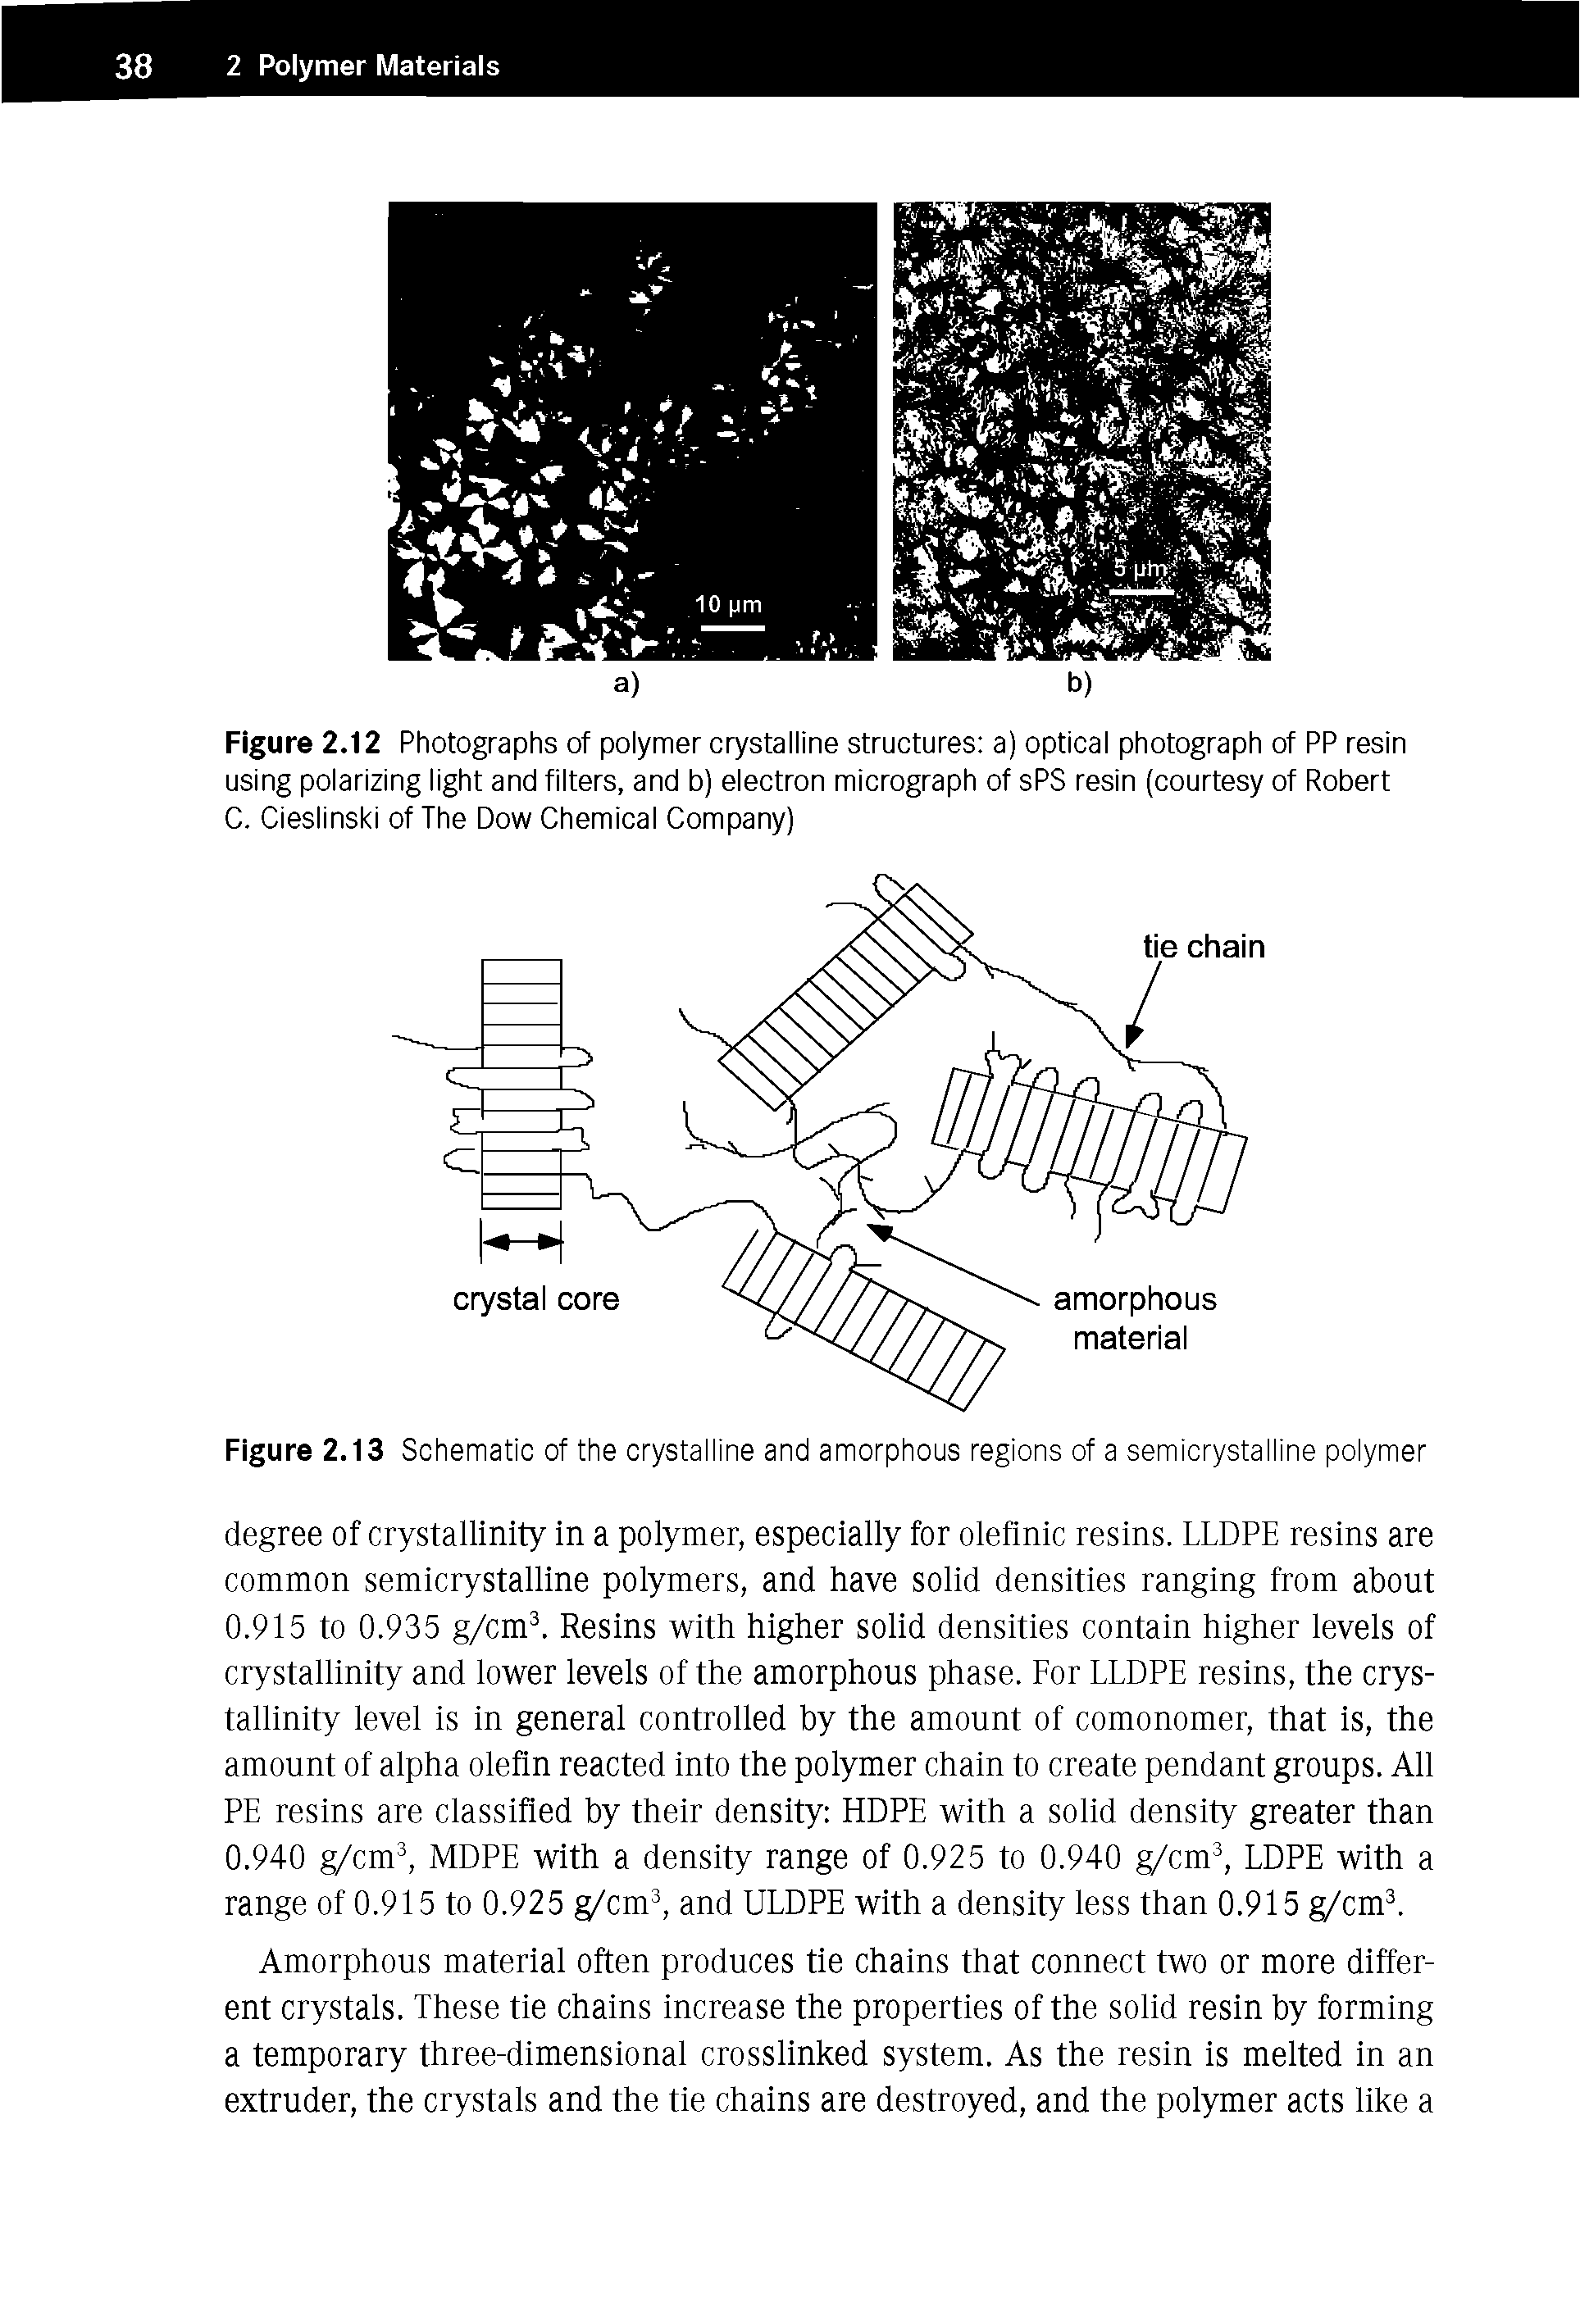 Figure 2.13 Schematic of the crystalline and amorphous regions of a semicrystalline polymer...